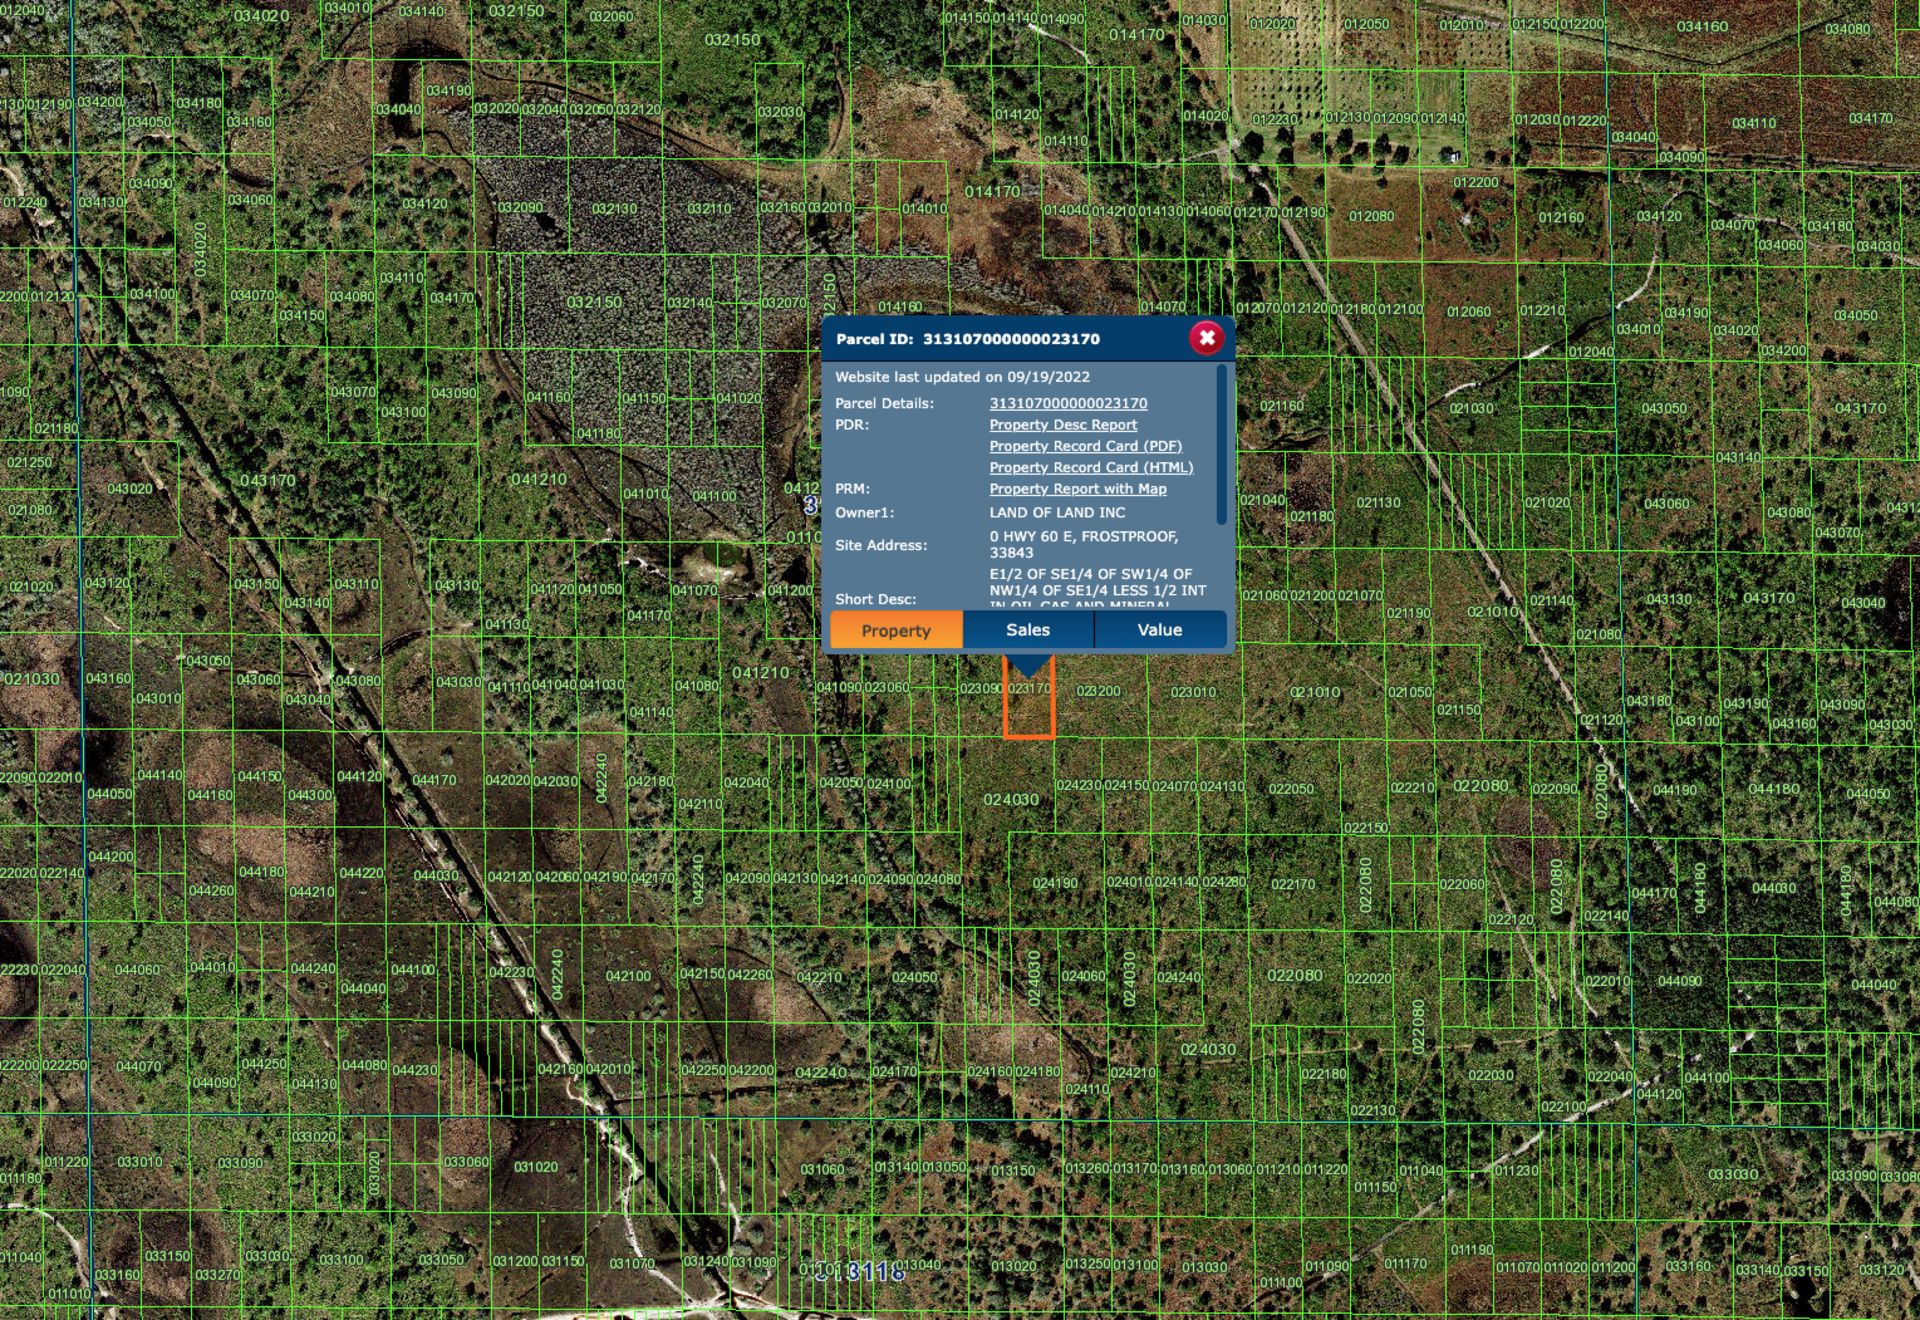 Enjoy Over an Acre in Peaceful Polk County, Florida! - Image 6 of 8